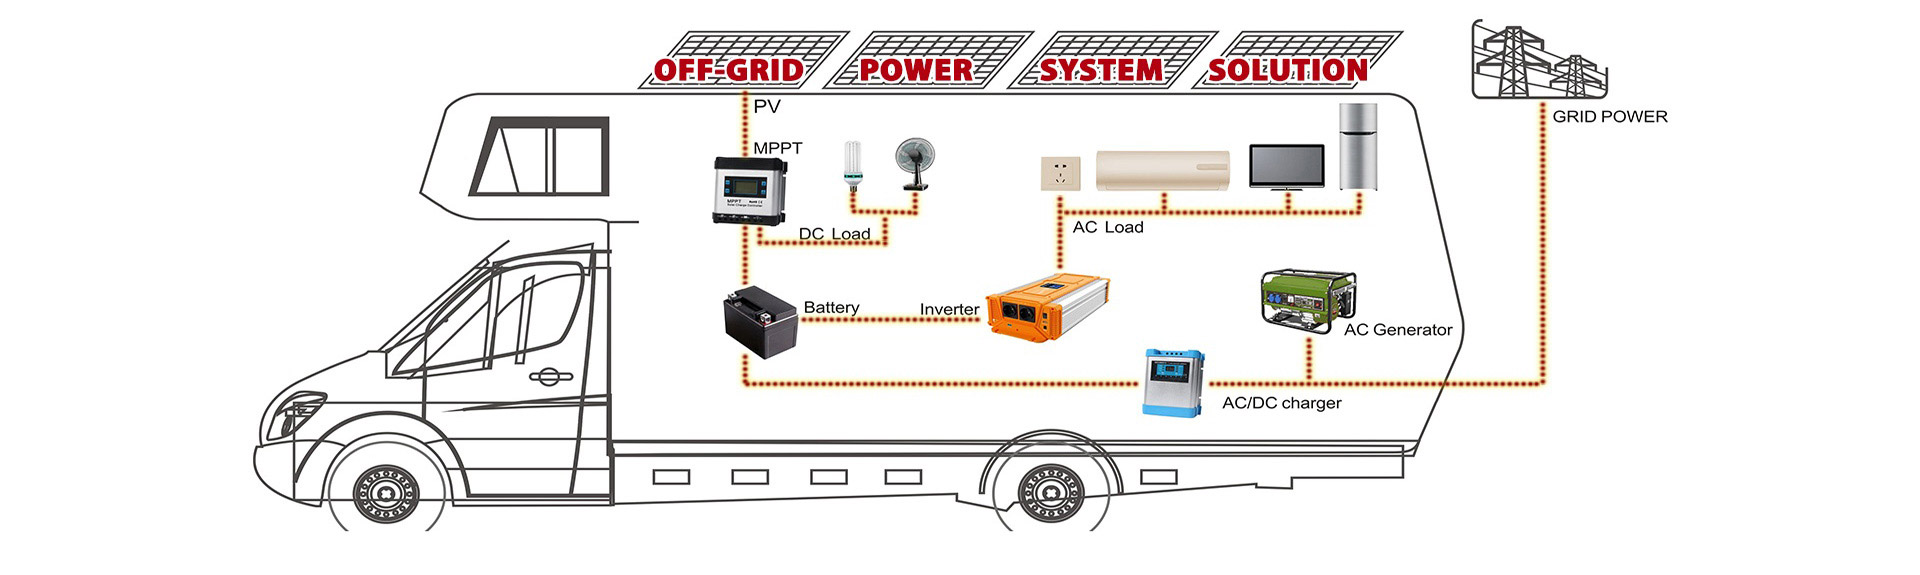 OFF-GRID POWER SYSTEM SOLUTION